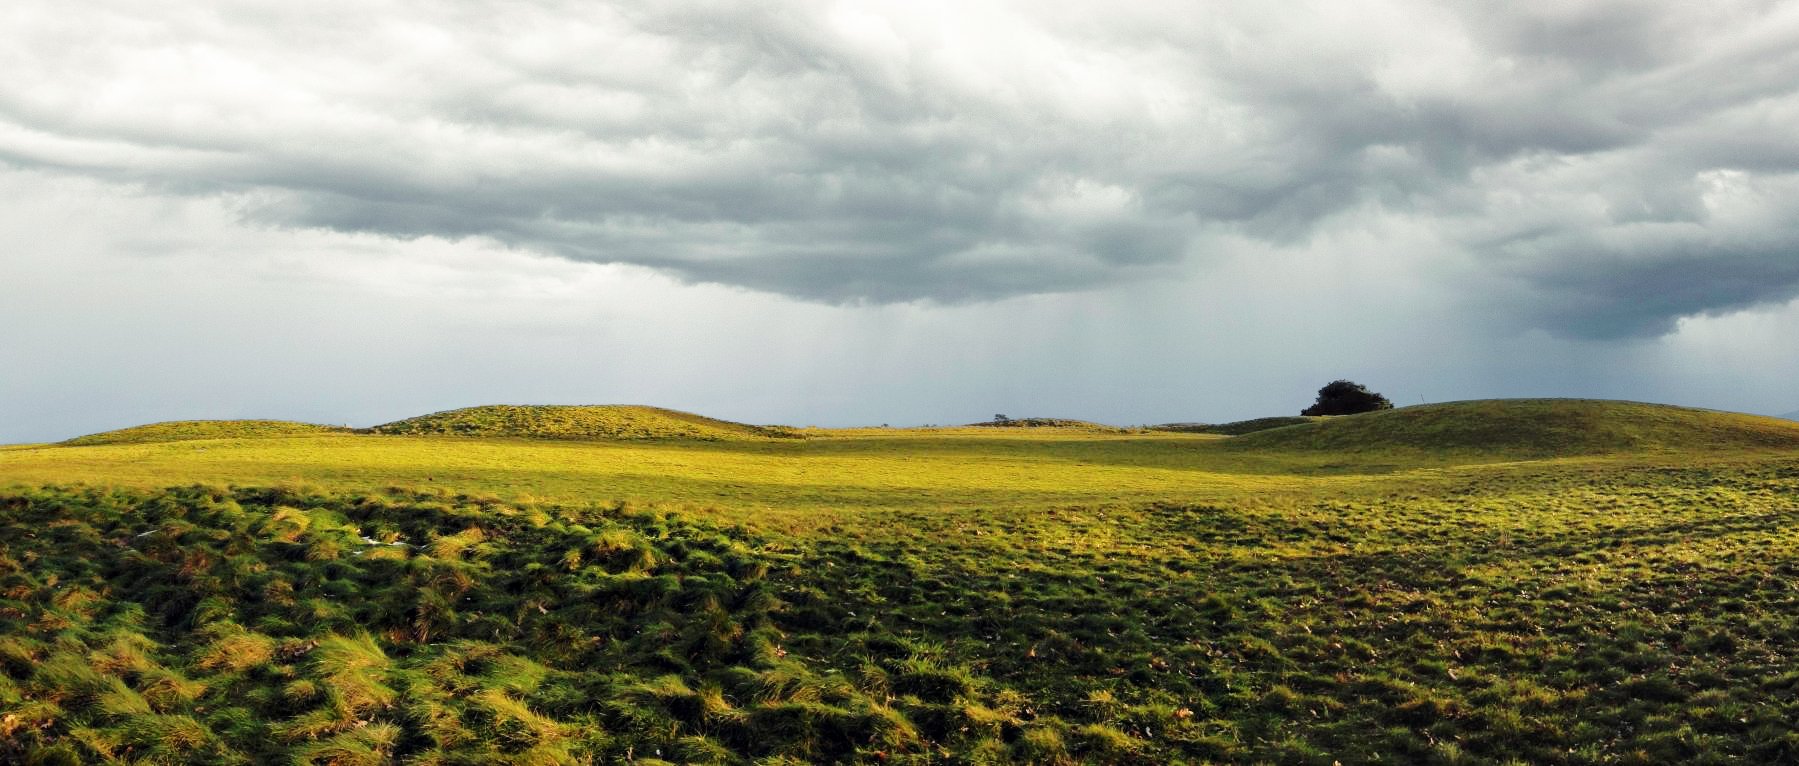 A panoramic image of a grassy hill at Sutton Hoo burial site with a cloudy sky, creating a dramatic and stormy mood.